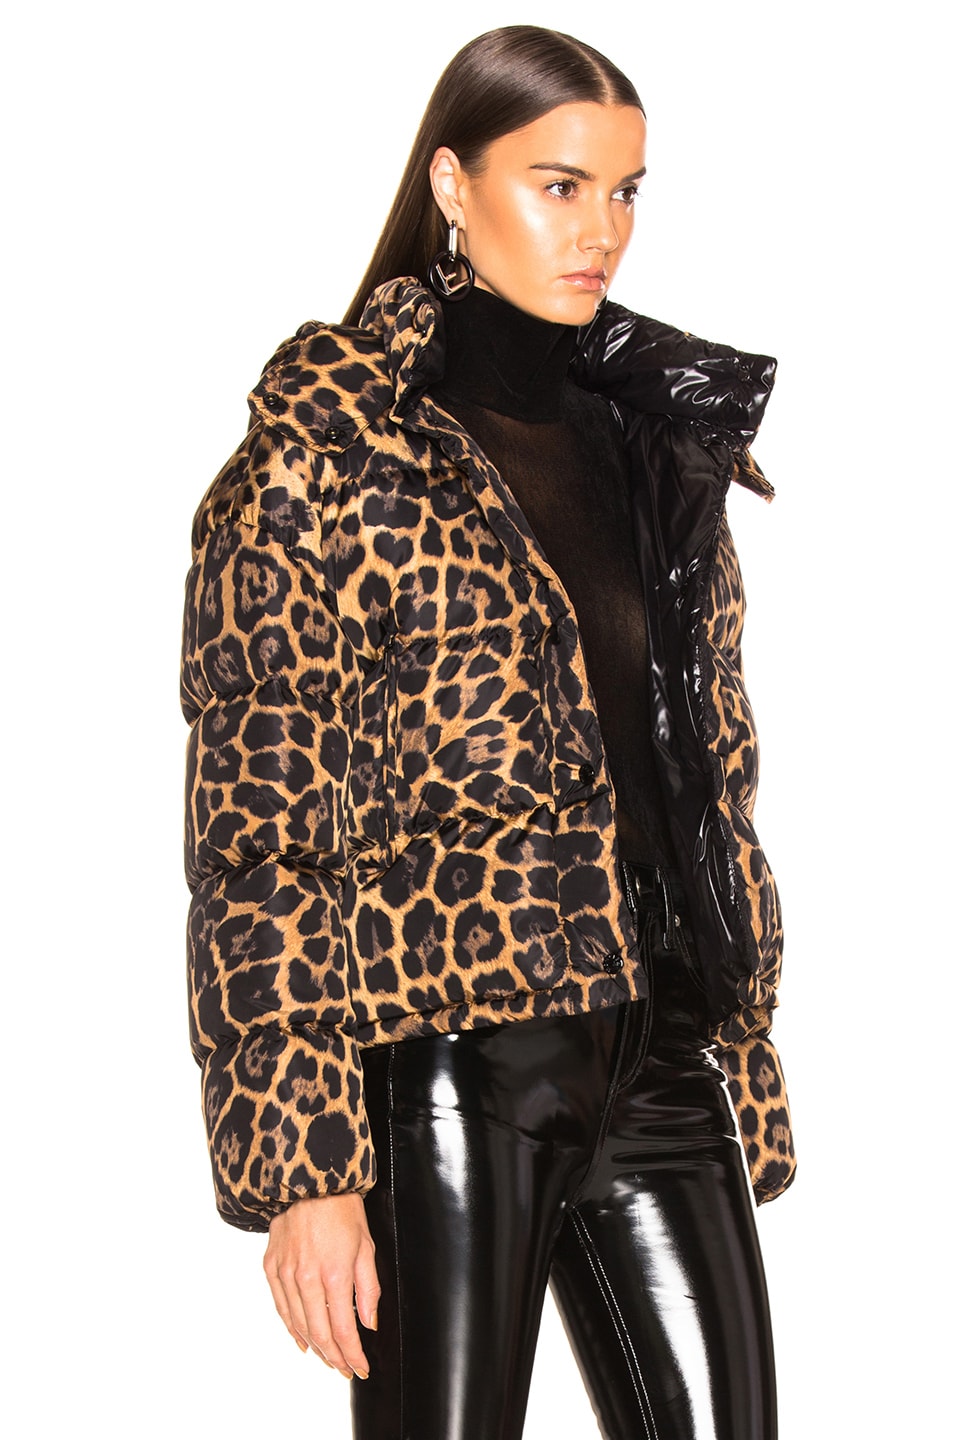 Moncler Caille Giubbotto Jacket in Leopard | FWRD